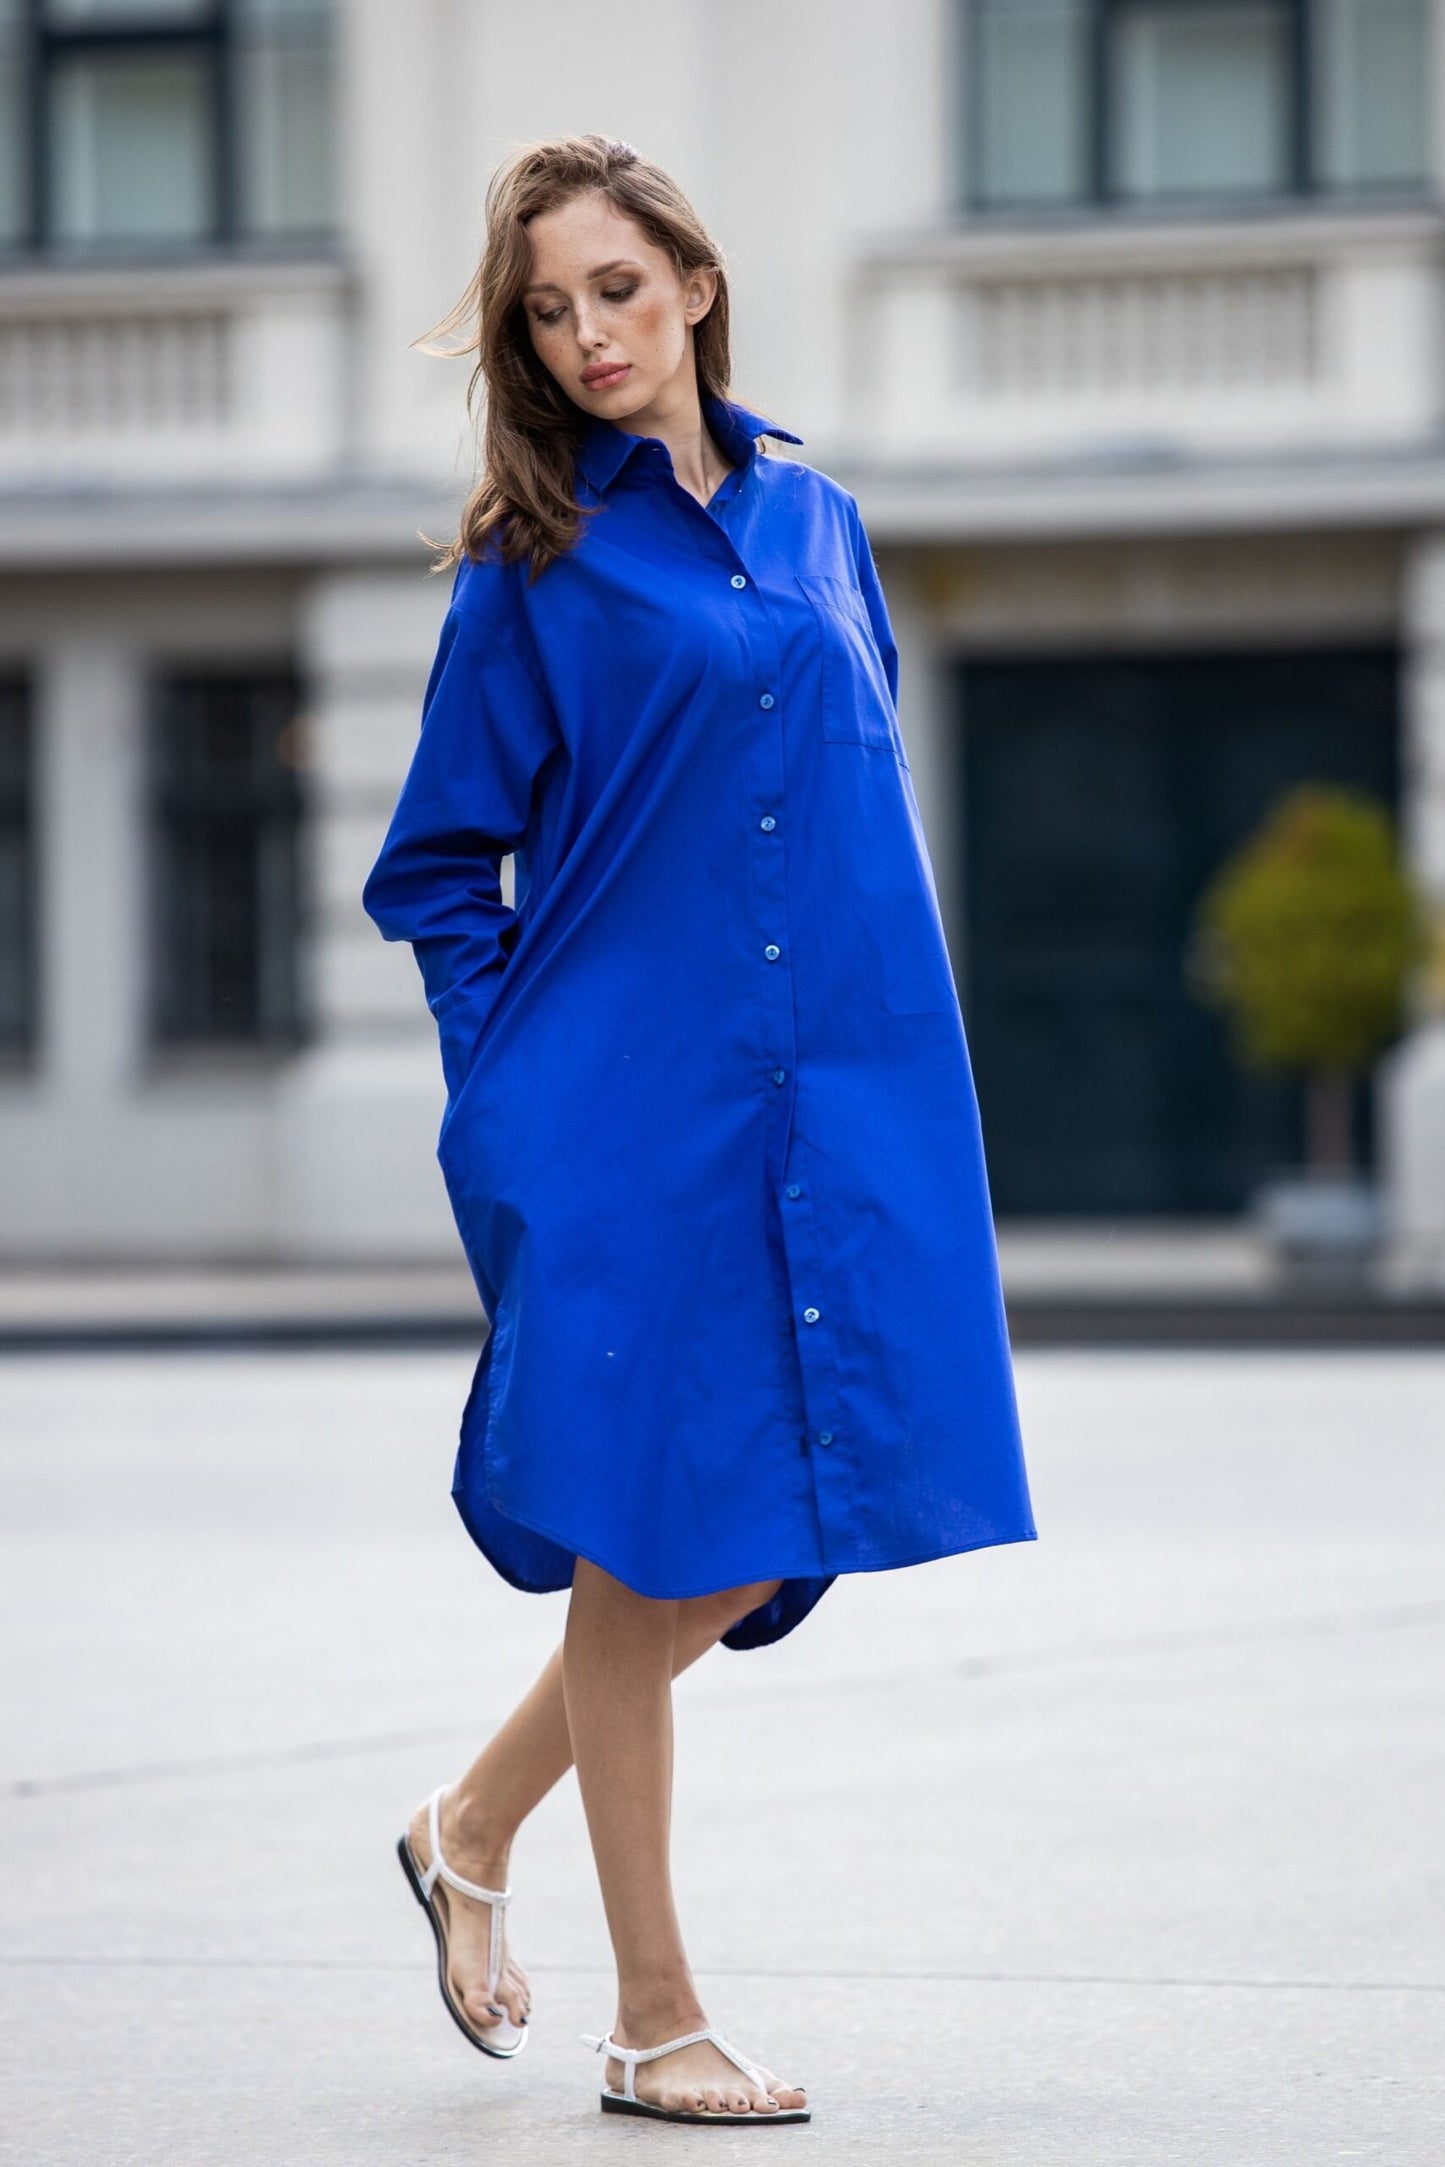 Oversize shirt in many colors